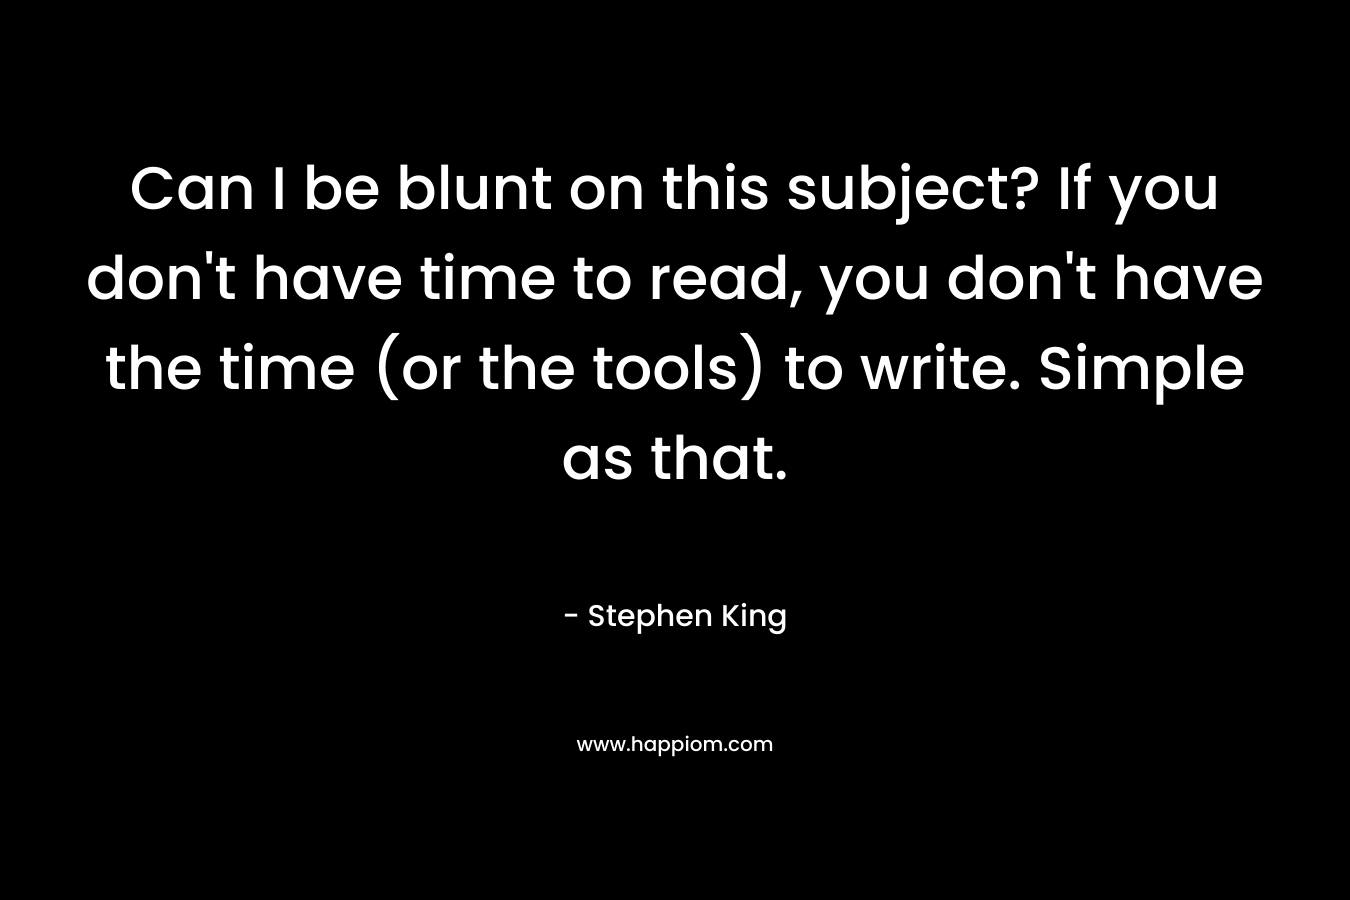 Can I be blunt on this subject? If you don’t have time to read, you don’t have the time (or the tools) to write. Simple as that. – Stephen King